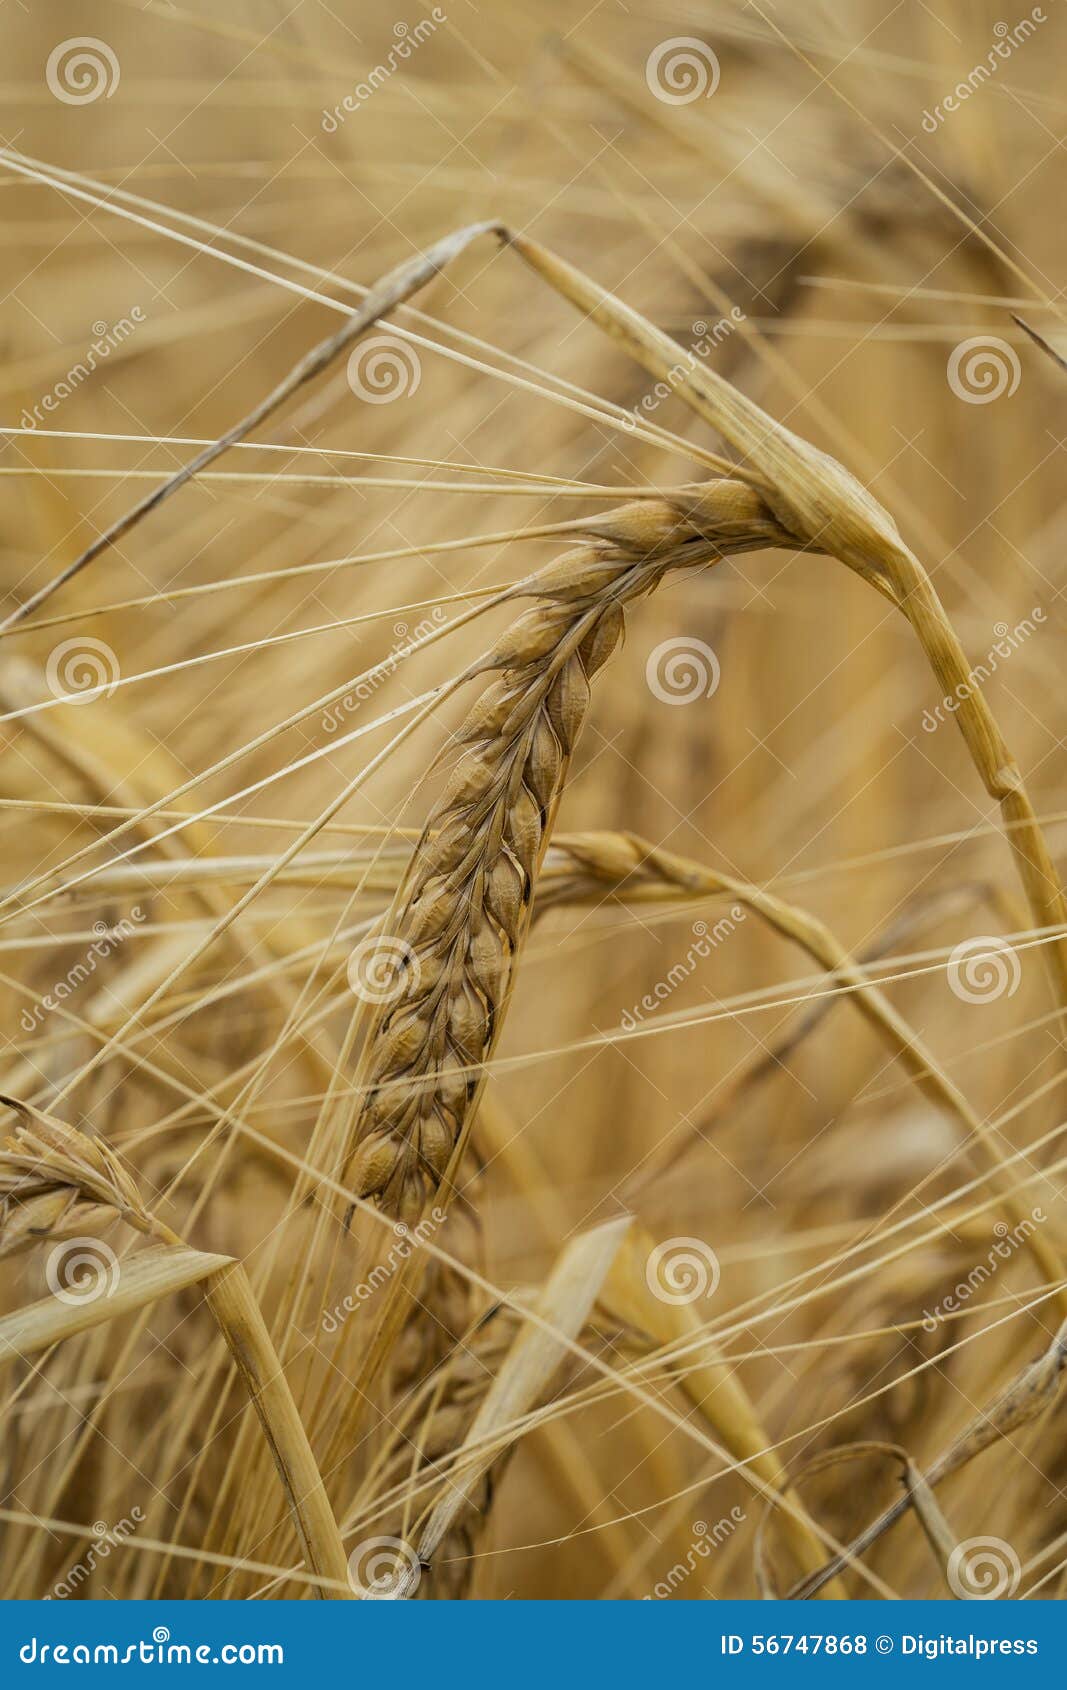 Agriculture Essay